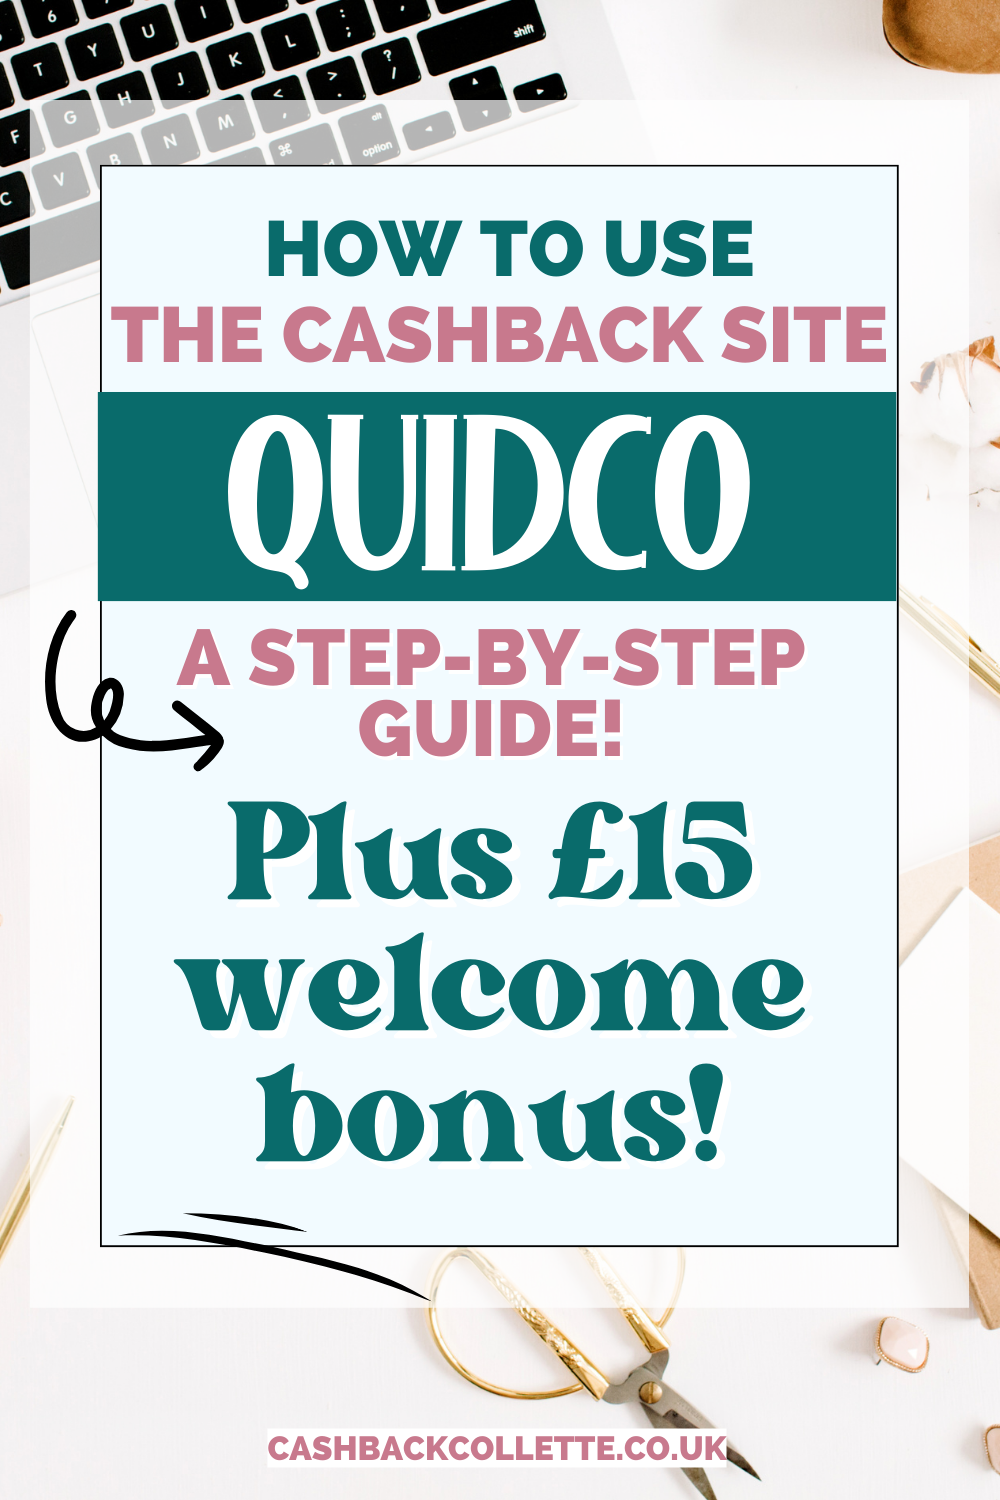 How to use Quidco pin 